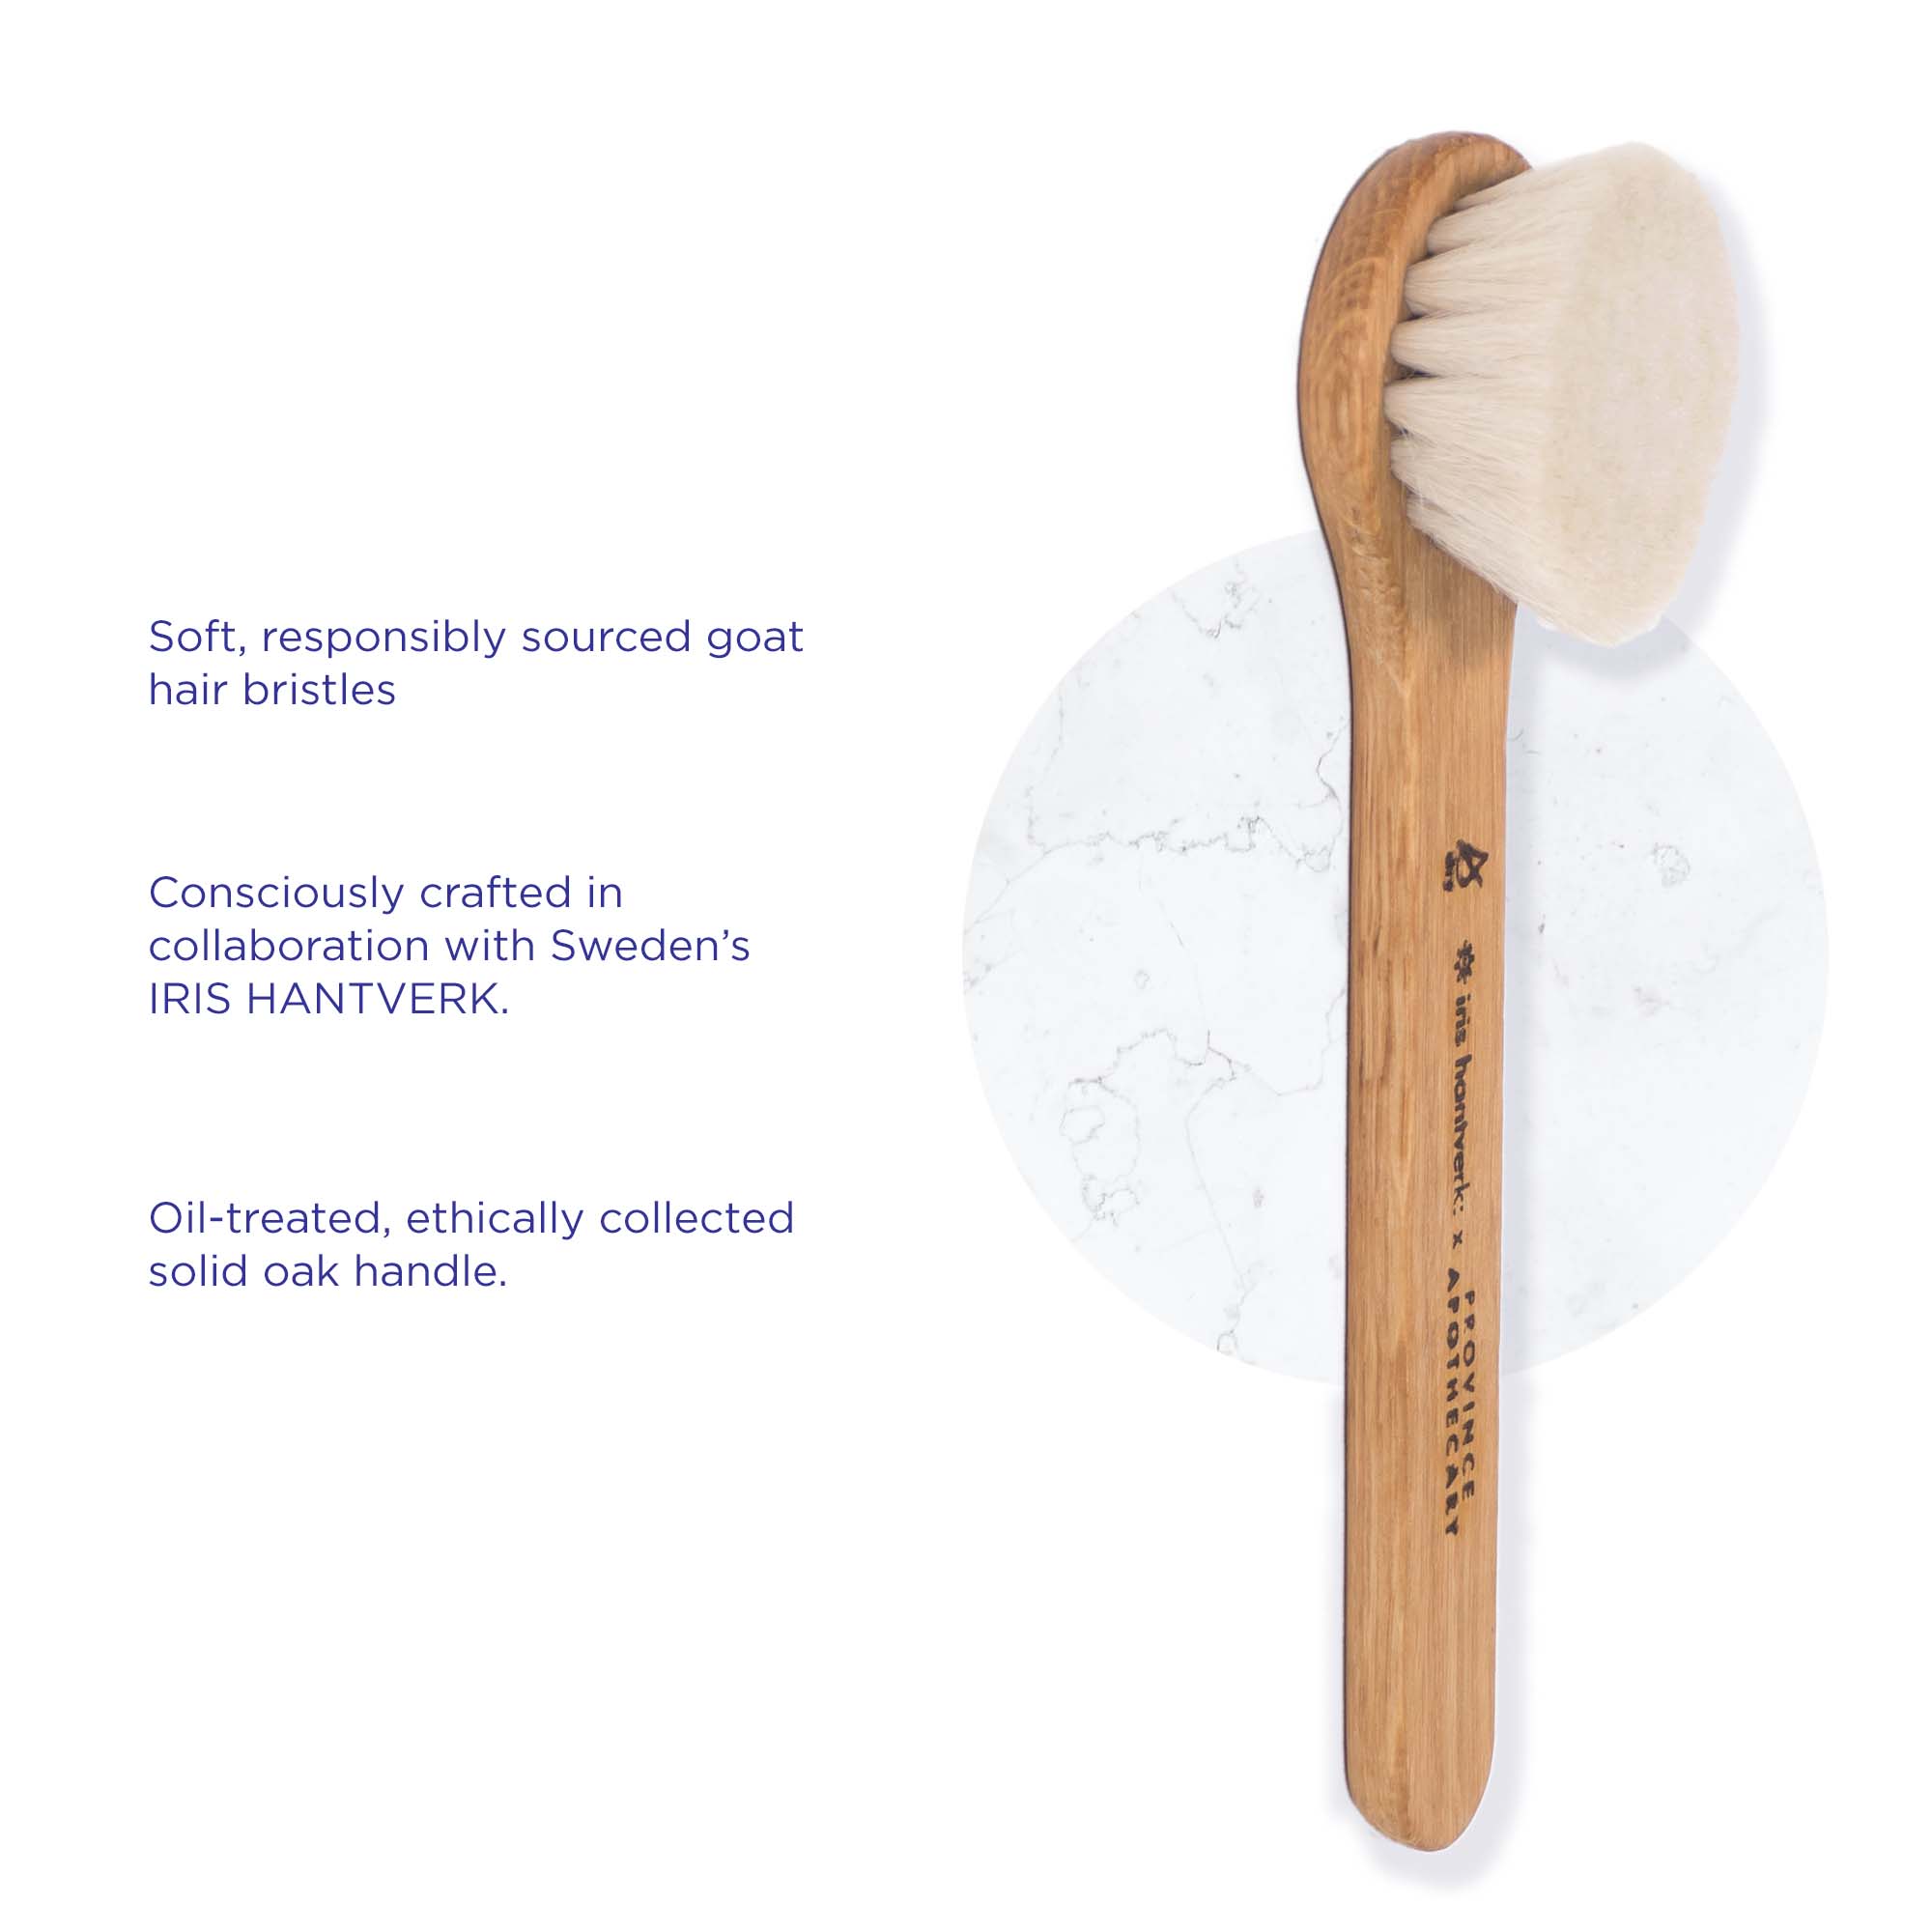 Daily Glow Facial Dry Brush infographic - Province Apothecary